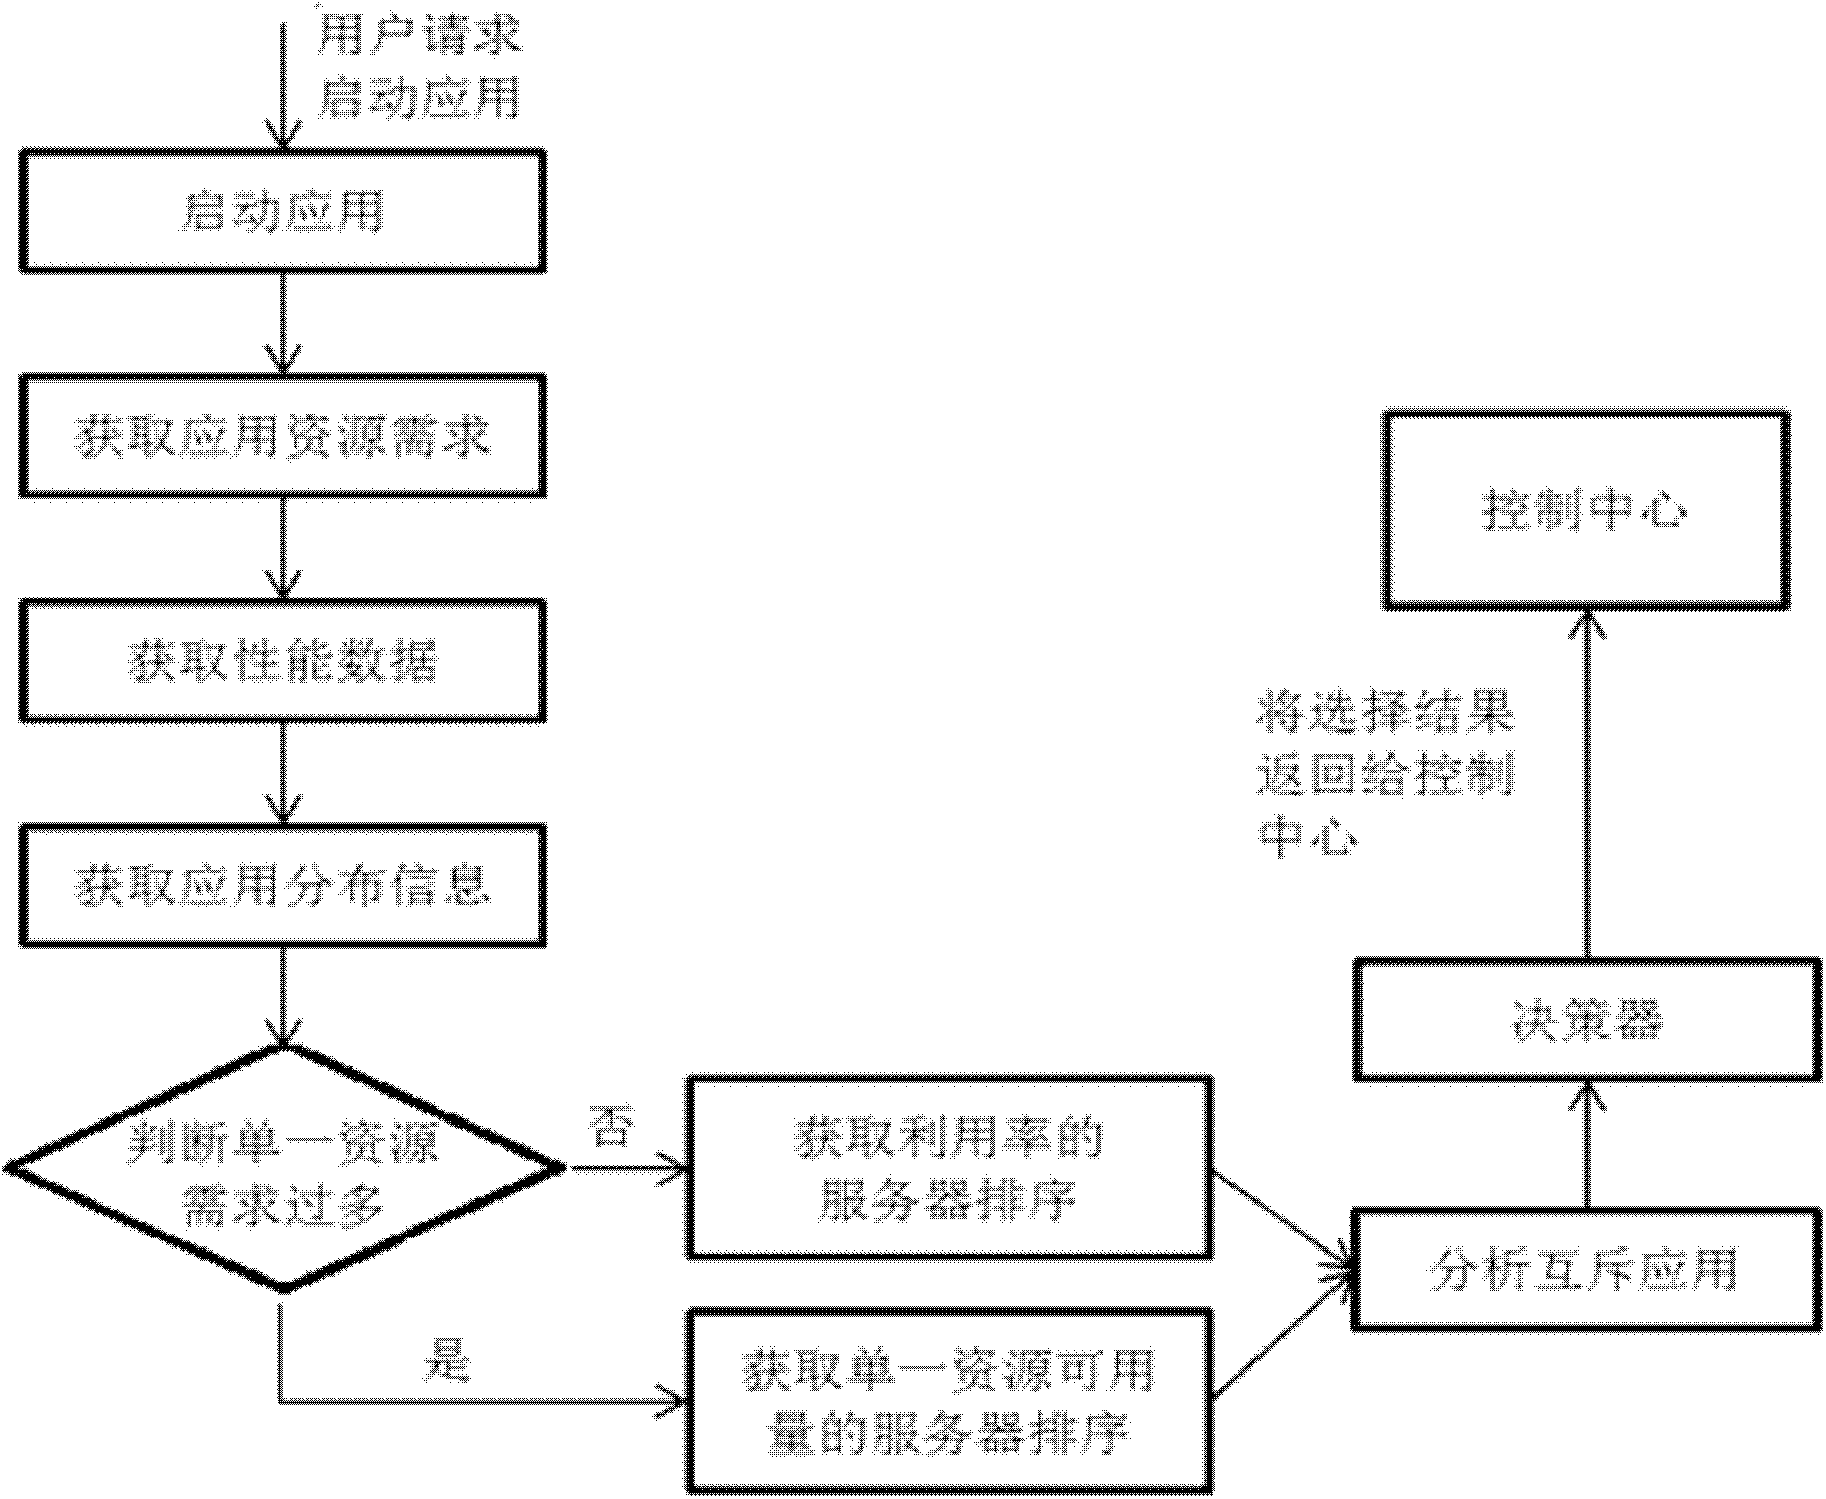 Method and system for automatically selecting application proxy server